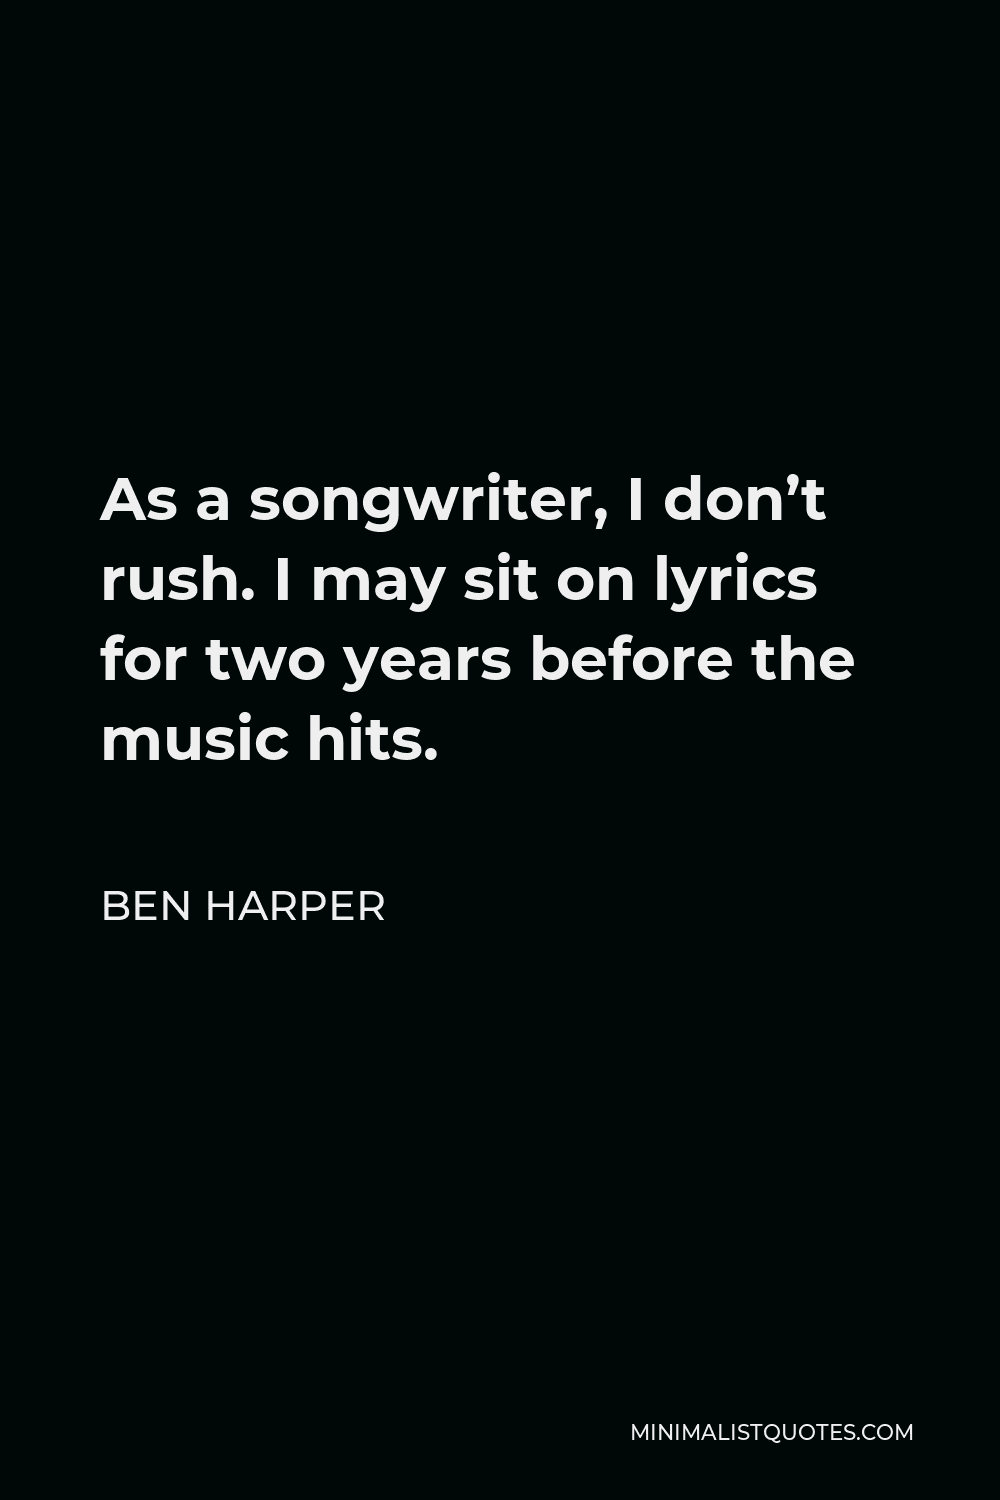 Ben Harper Quote - As a songwriter, I don’t rush. I may sit on lyrics for two years before the music hits.